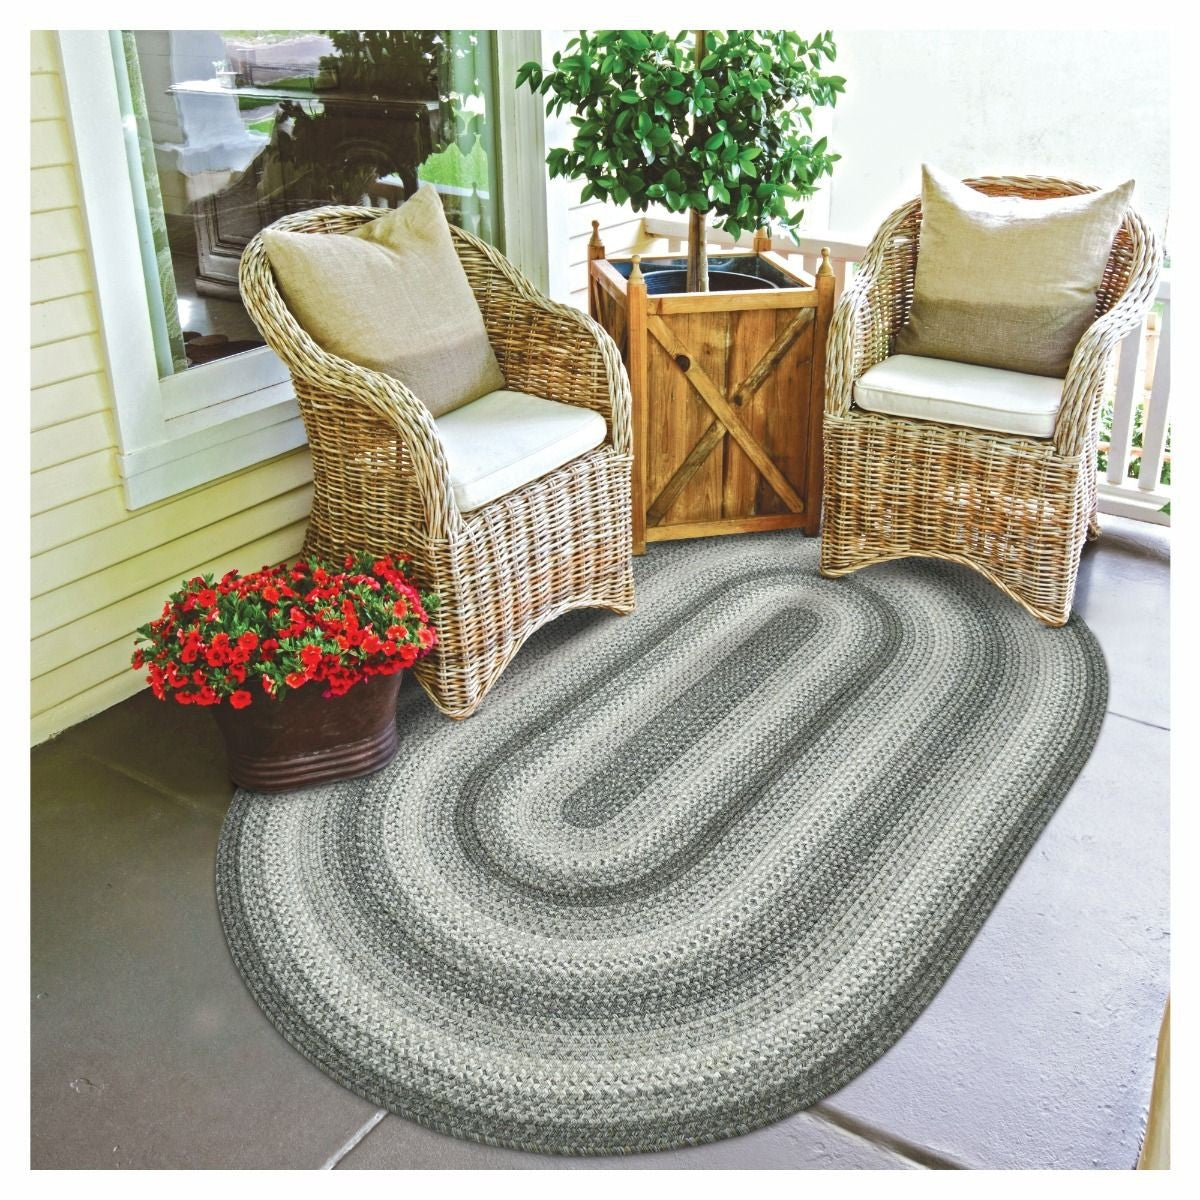 Will Make in Your Choice of Colors: 5 Foot by 7 Foot Braided Oval Rug 